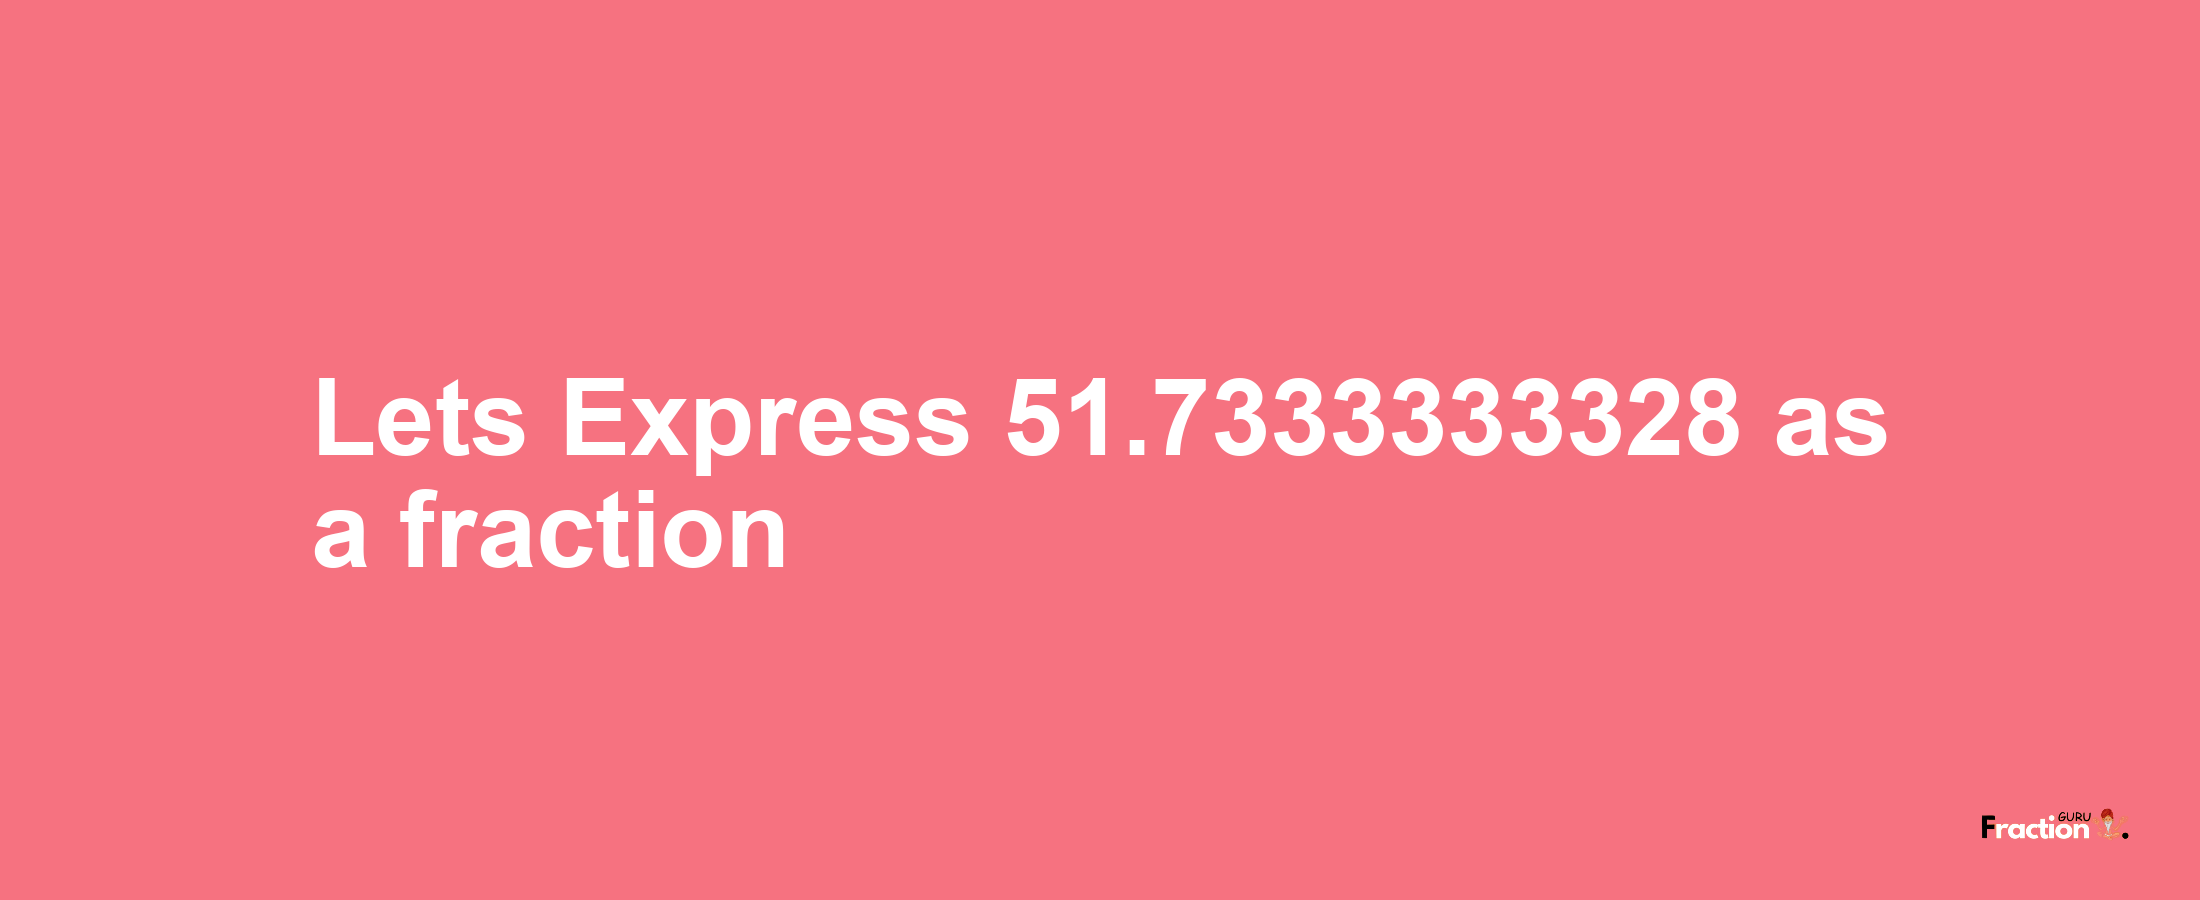 Lets Express 51.7333333328 as afraction